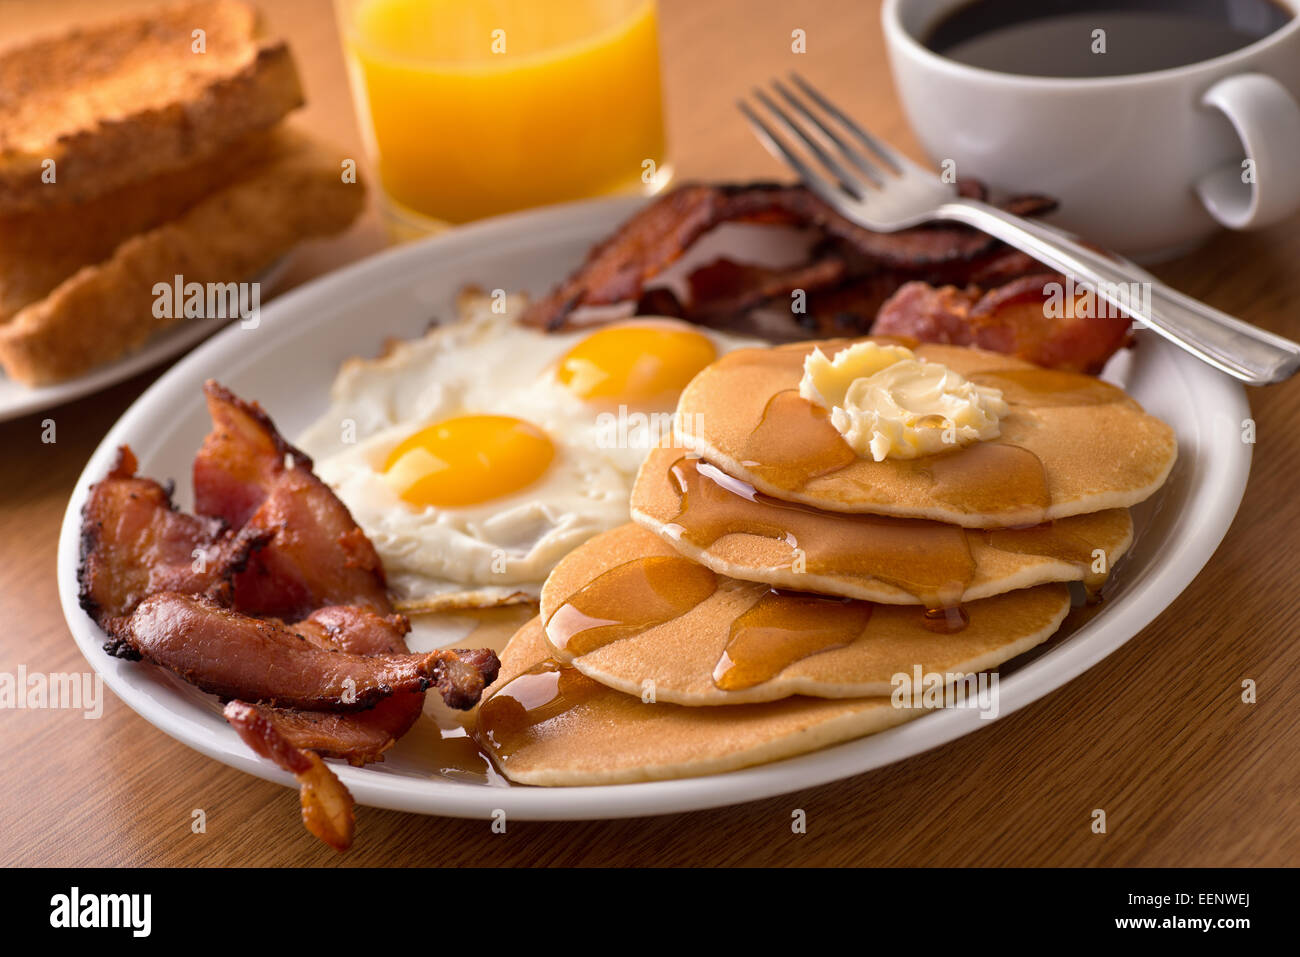 A delicous home style breakfast with crispy bacon, eggs, pancakes, toast, coffee, and orange juice. Stock Photo